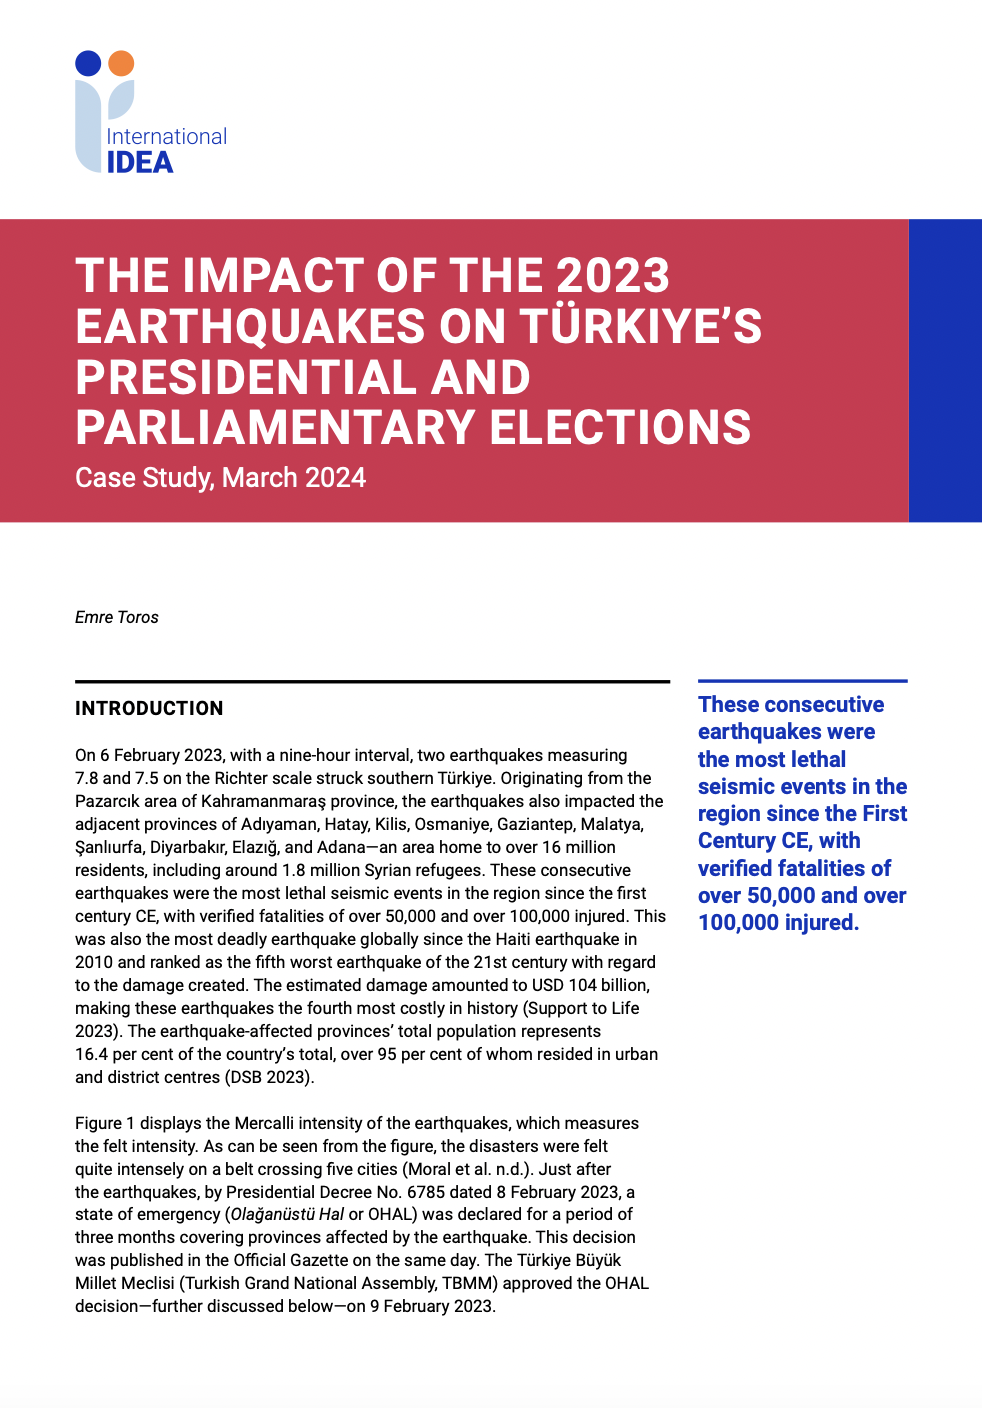 The Impact of the 2023 Earthquakes on Türkiye's Presidential and Parliamentary Elections